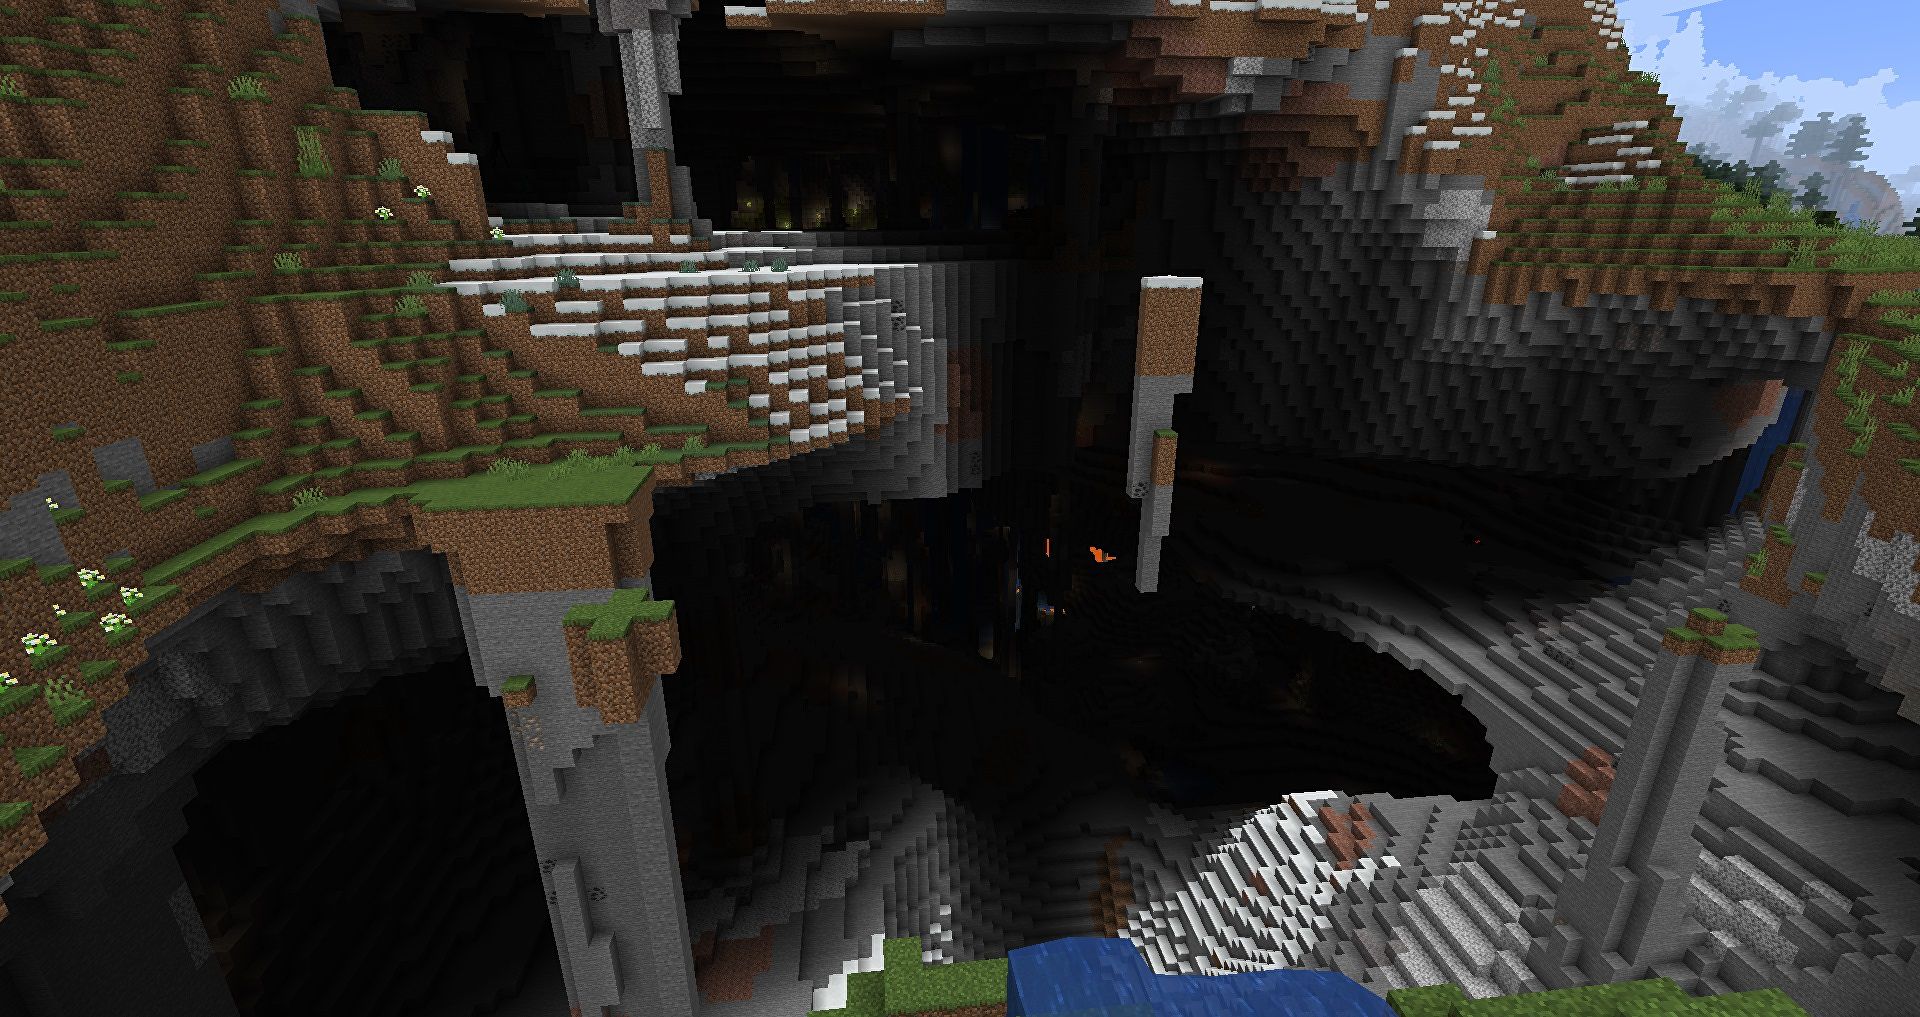 Minecraft is generating implausible caves within the version 1.18 snapshot